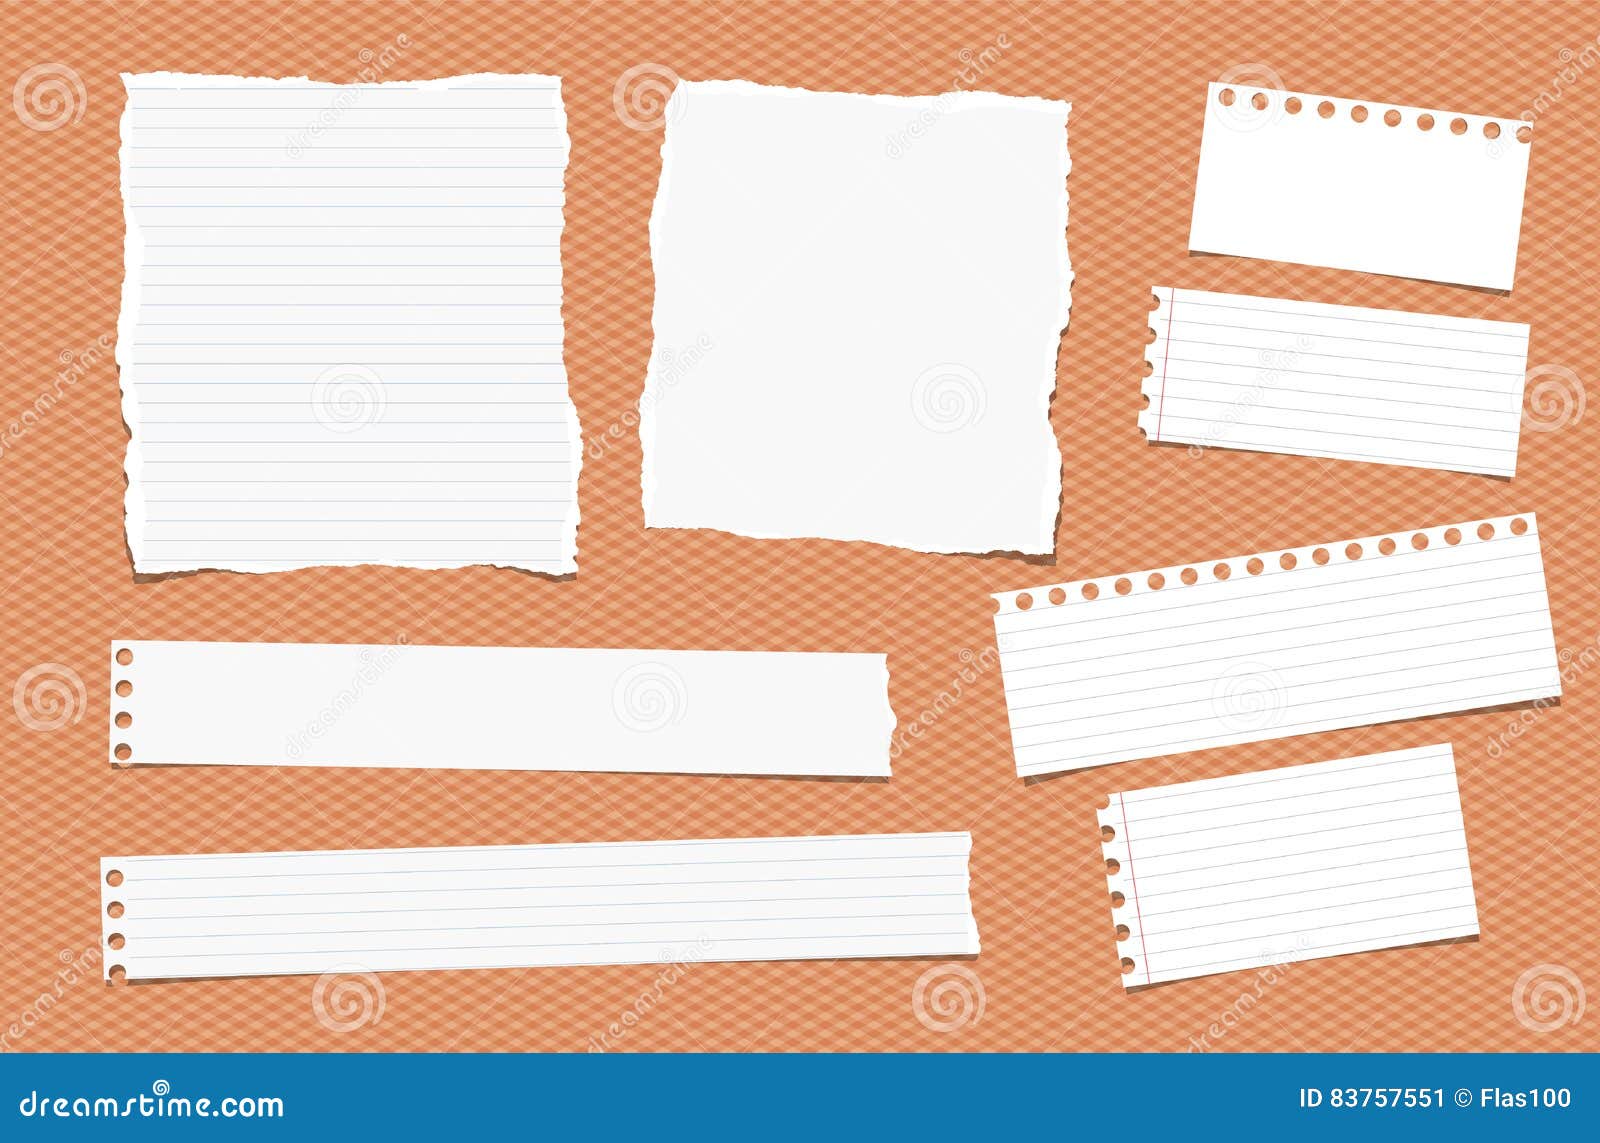 pieces of ripped different size white note, notebook, copybook paper sheets